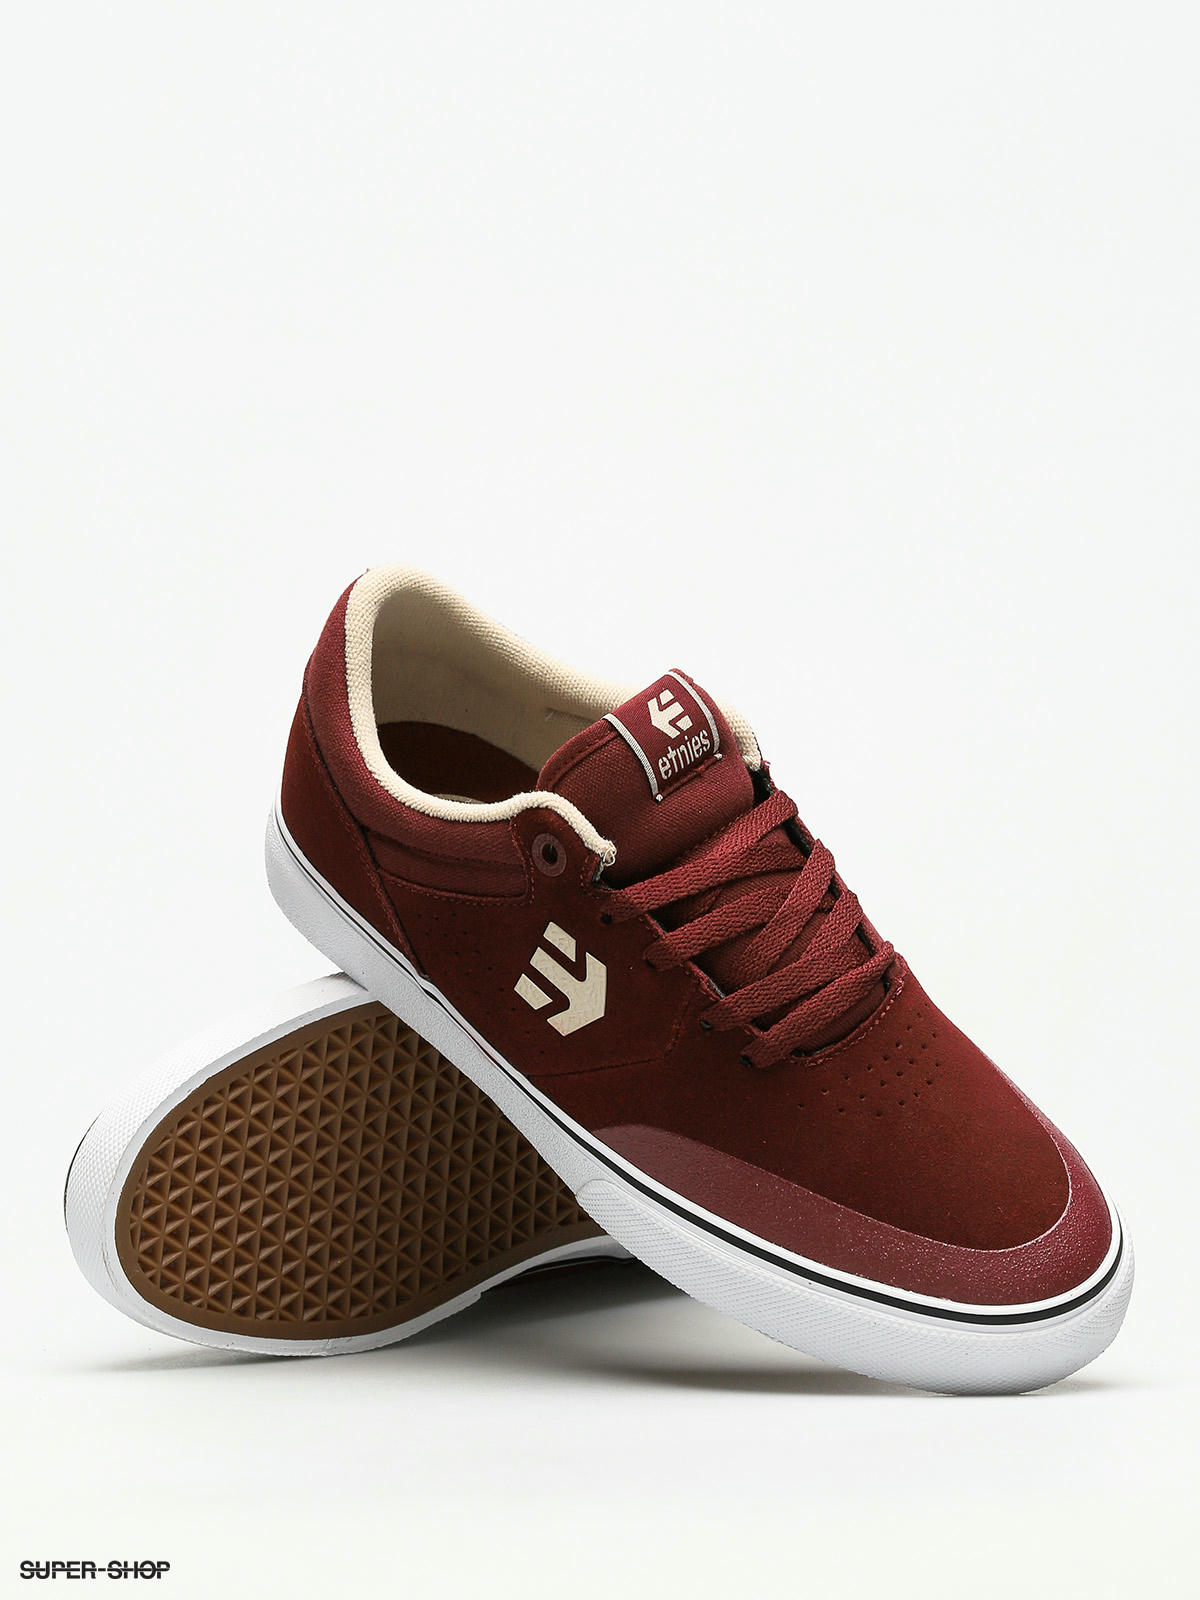 burgundy and white shoes